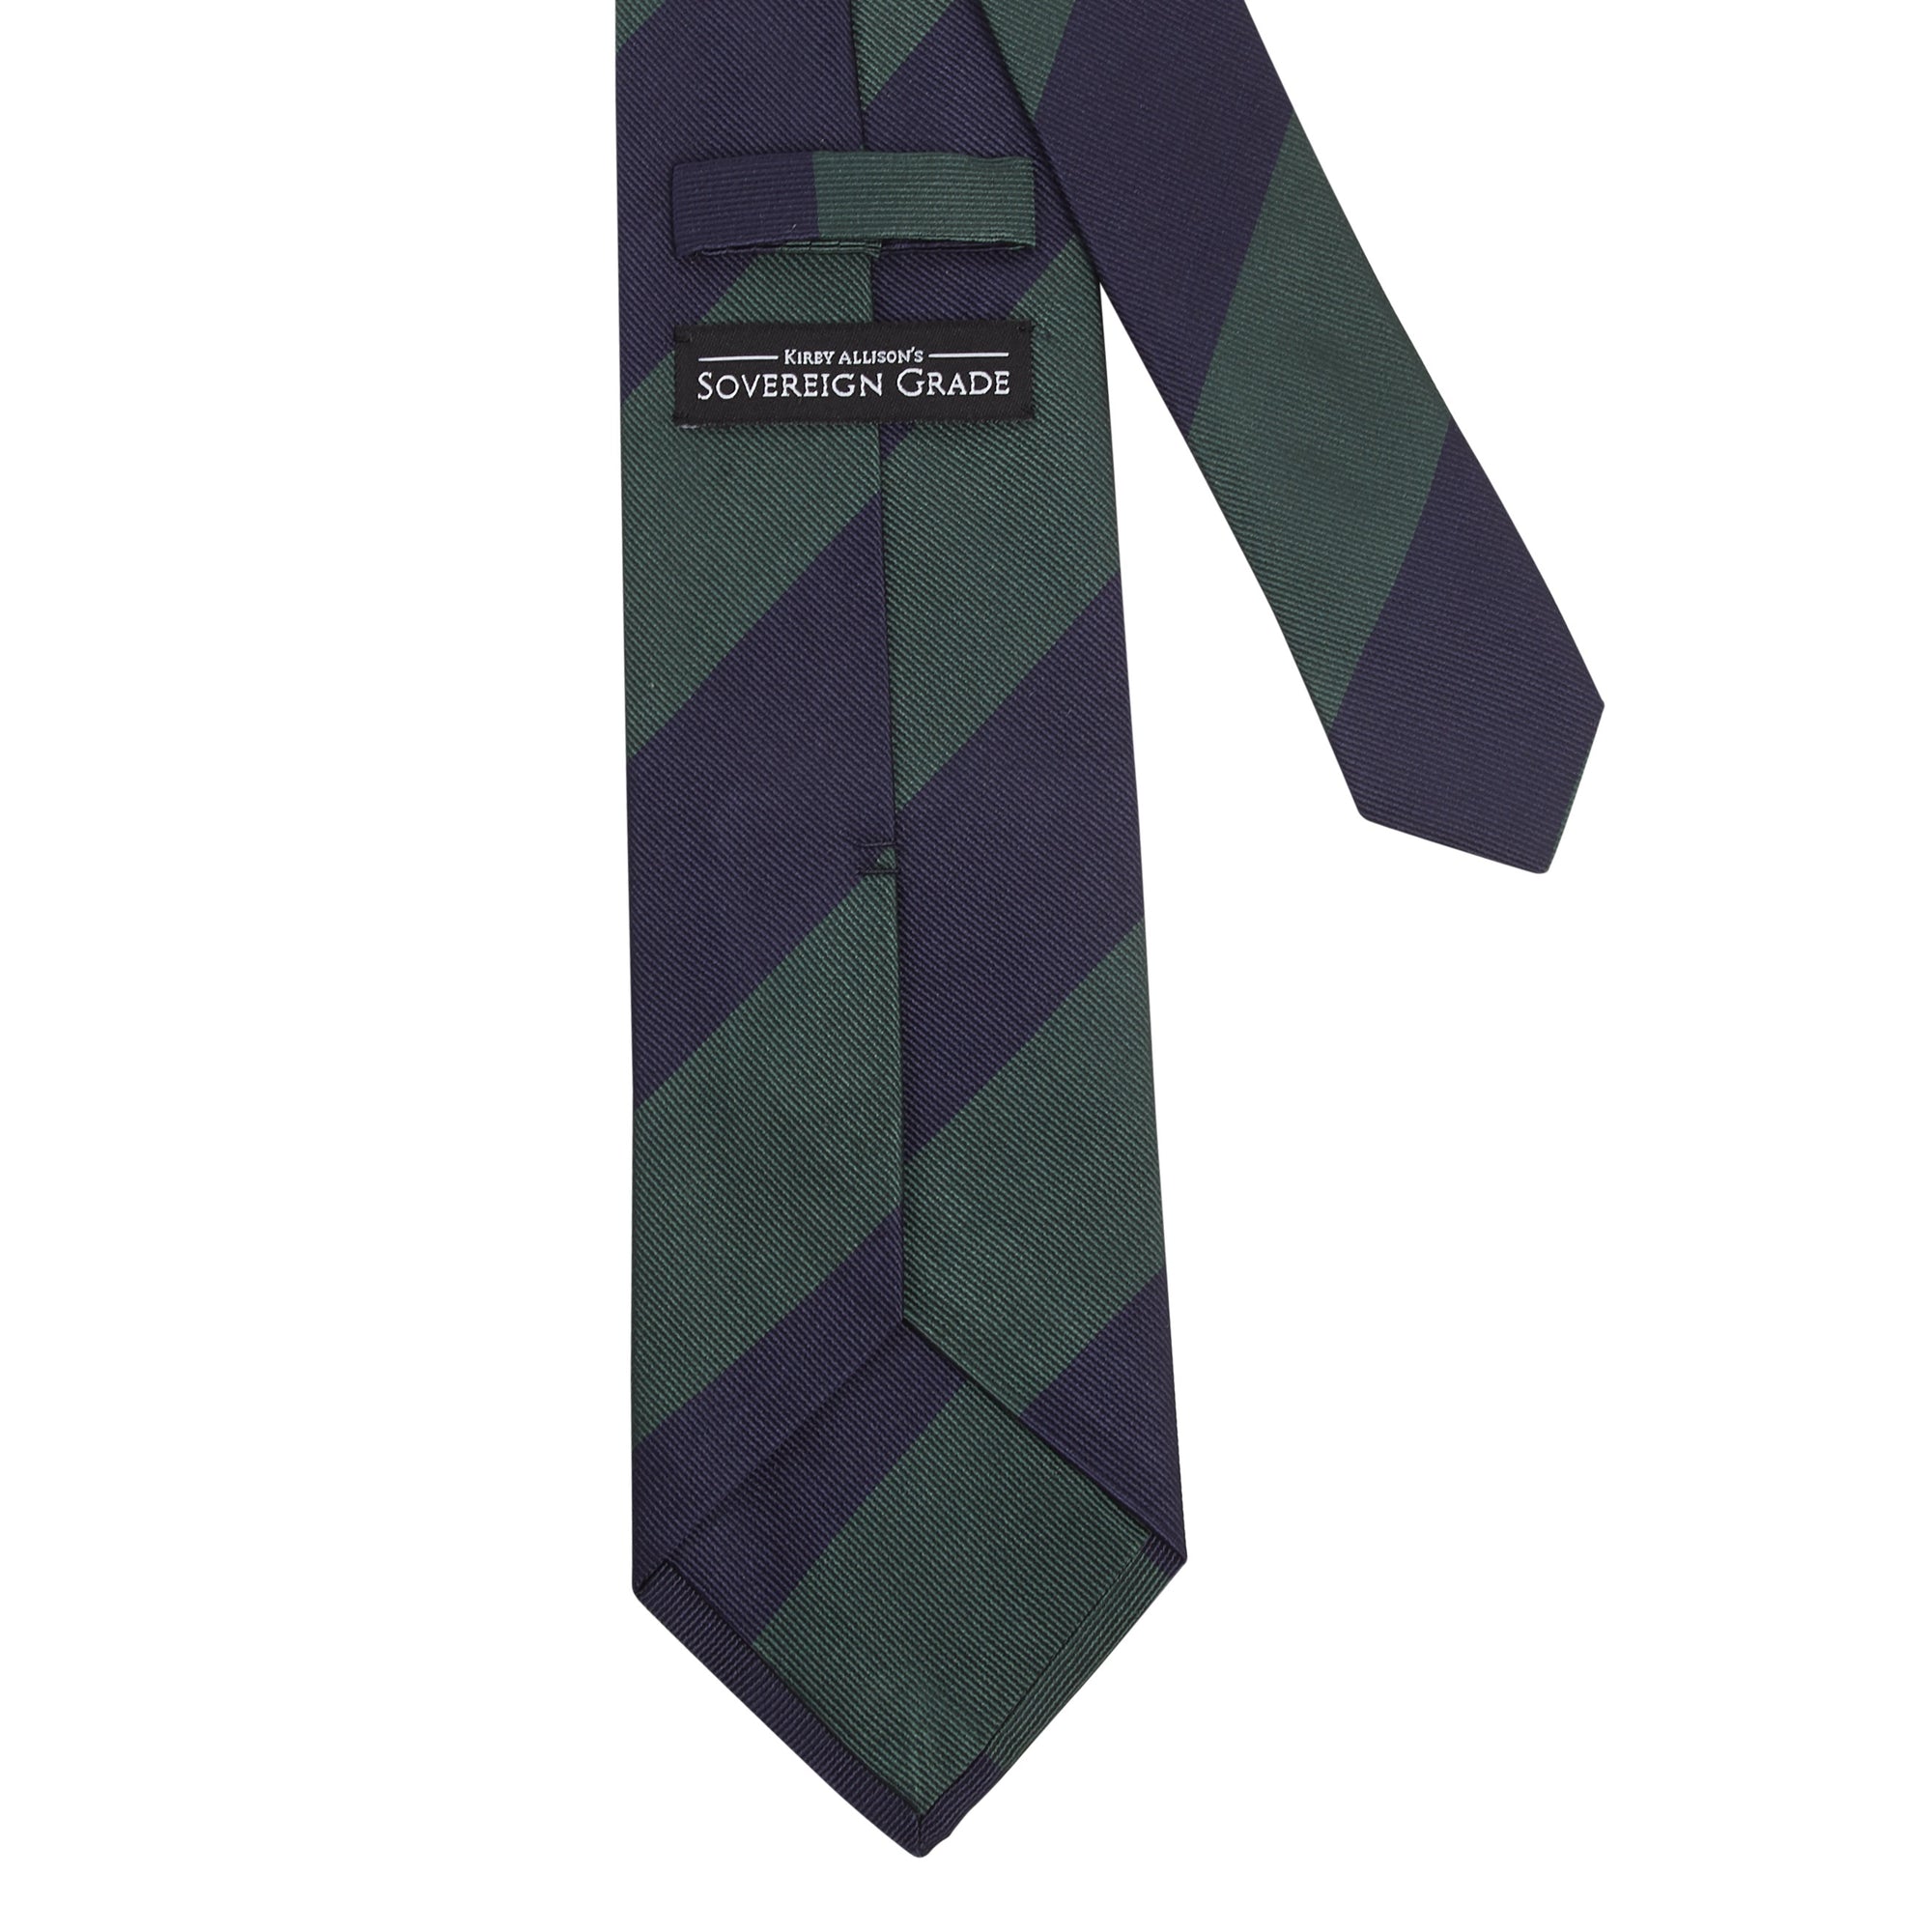 Sovereign Grade Midnight/Forest Household Guards (Royal Artillery) Tie